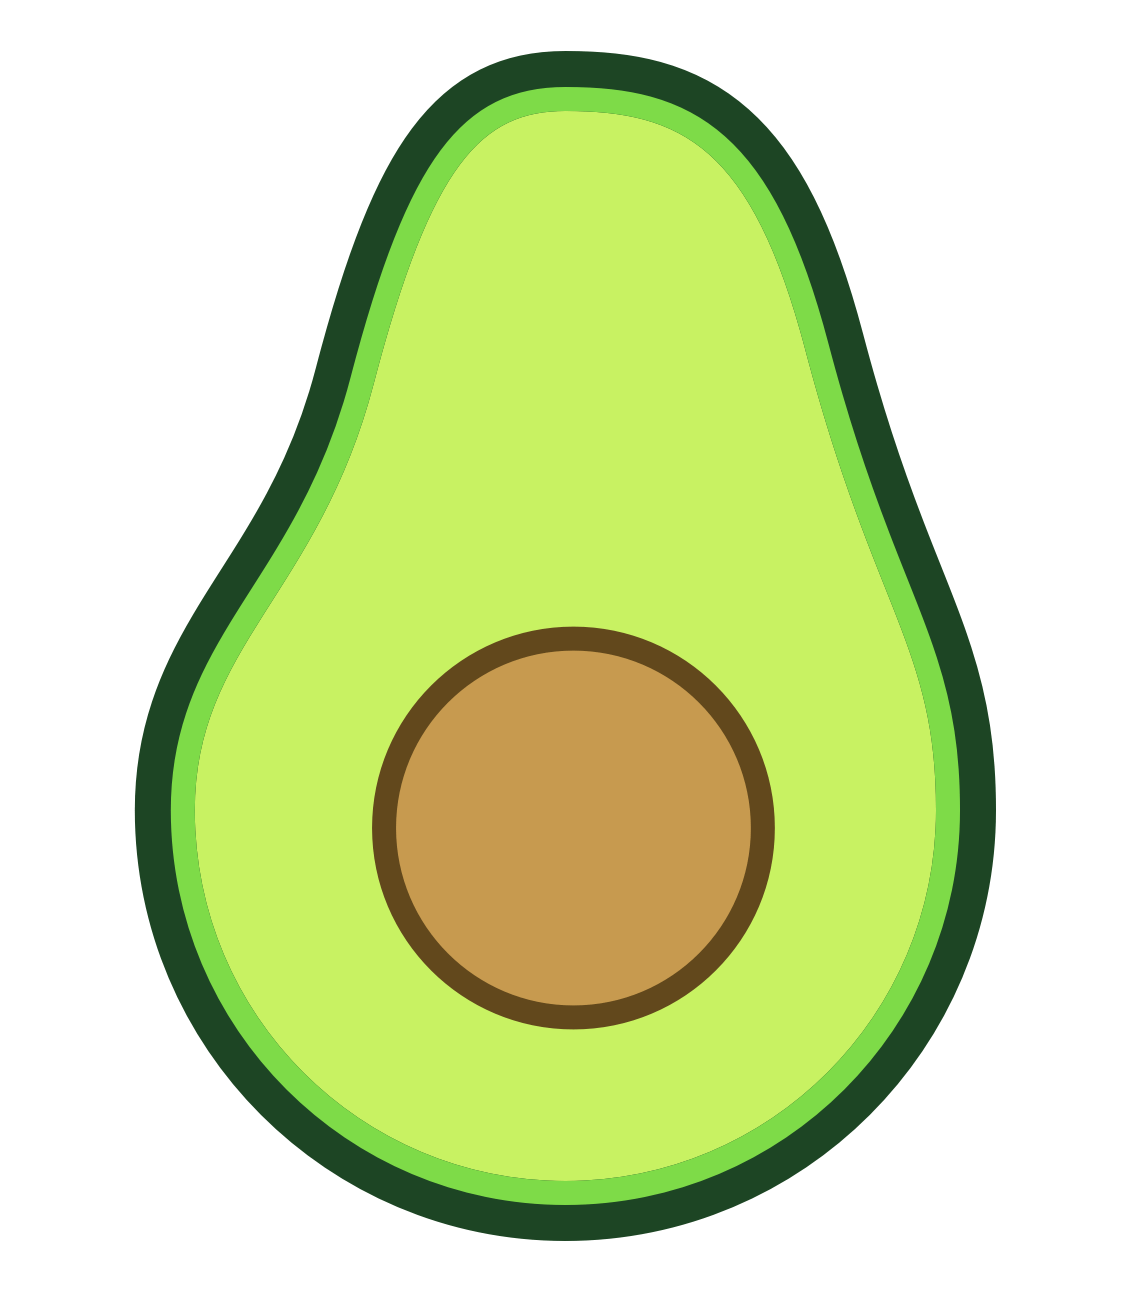 Aesthetic Avocado PNG Transparent Images - PNG All